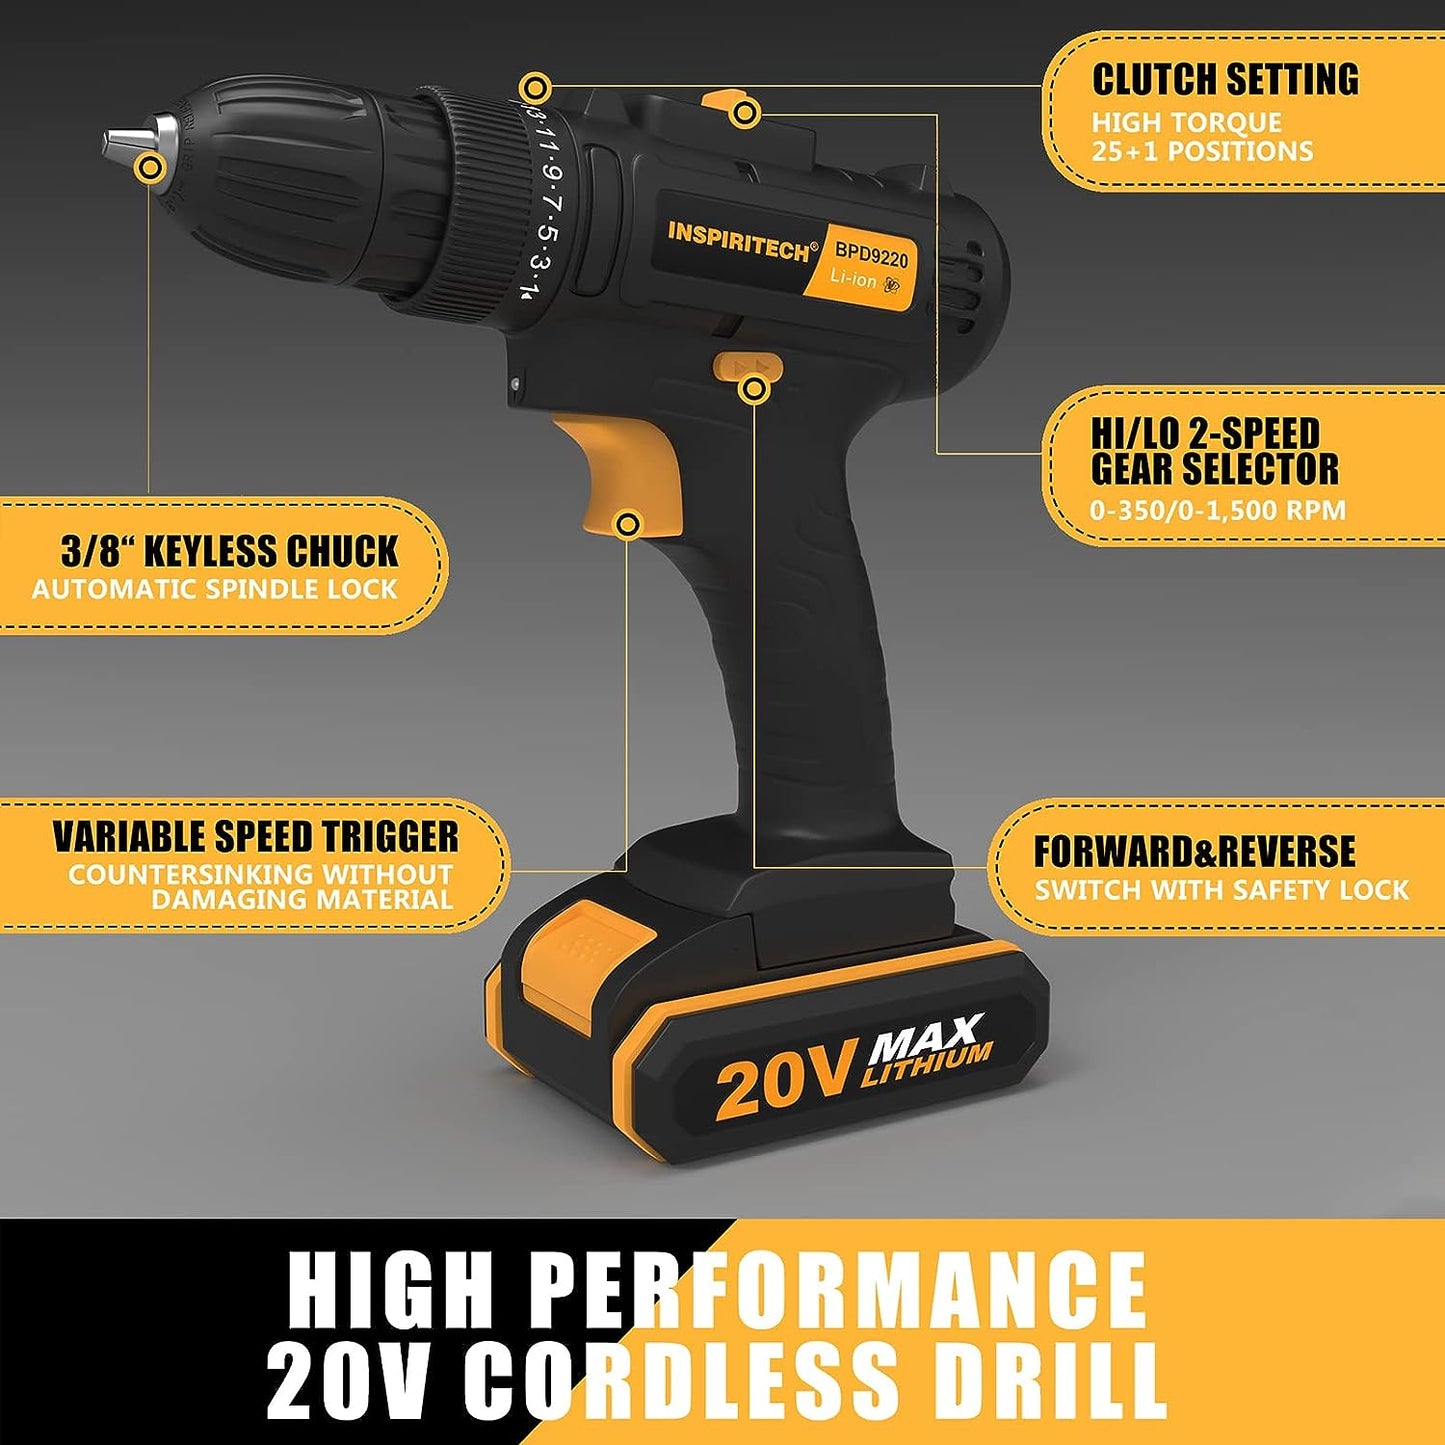 20V Cordless Drill, 2 Batteries, Charger, 3/8In Chuck, Variable Speed, 25+1 Torque Setting